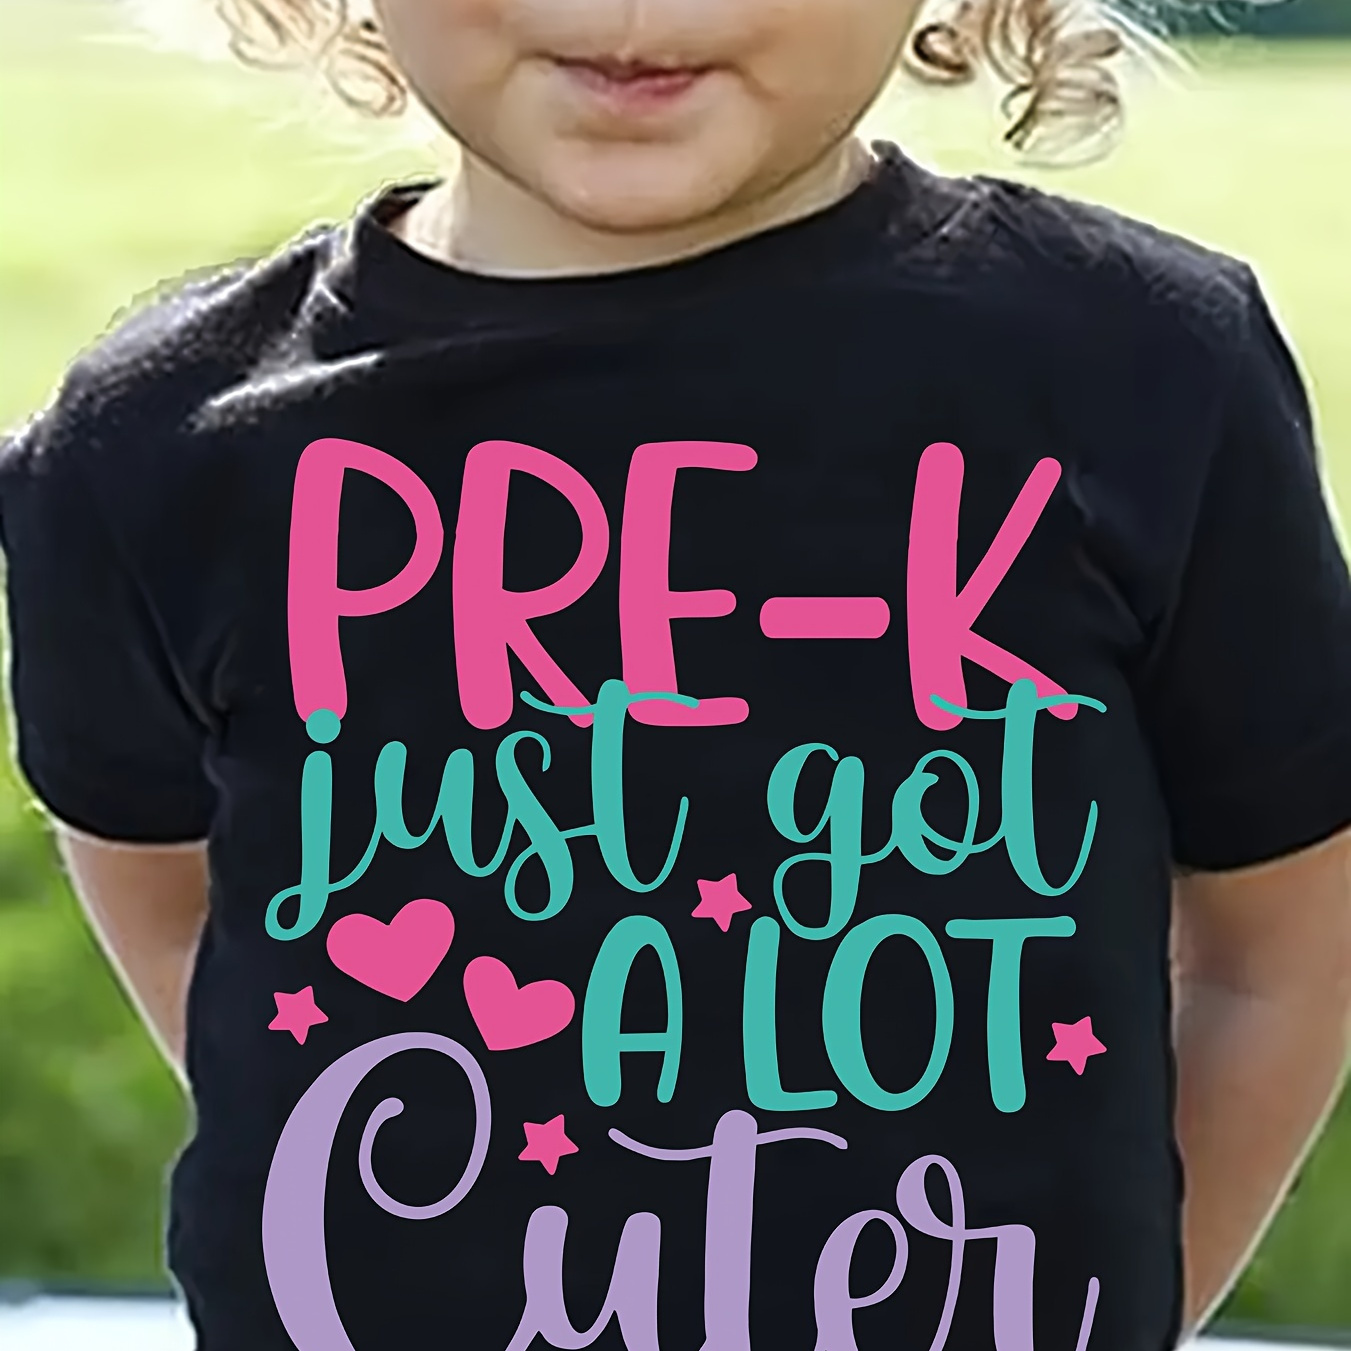 

Pre-k Just Got A Lot Cuter With Hearts Graphic Print, Girls' Casual Crew Neck Short Sleeve T-shirt, Comfy Top Clothes For Spring And Summer For Outdoor Activities